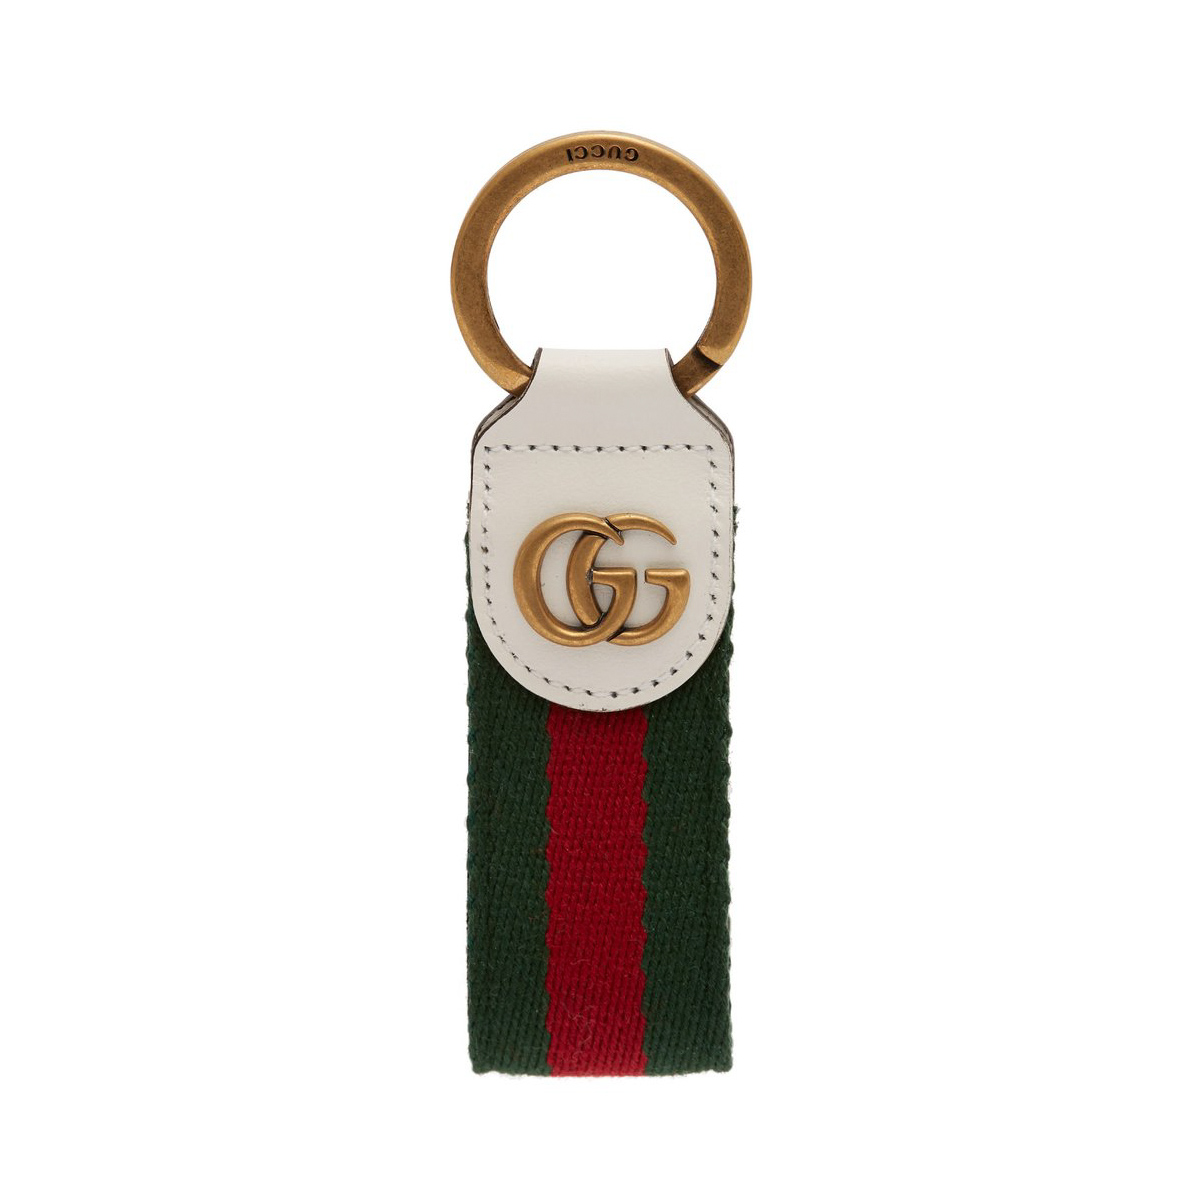 cheapest item in gucci store